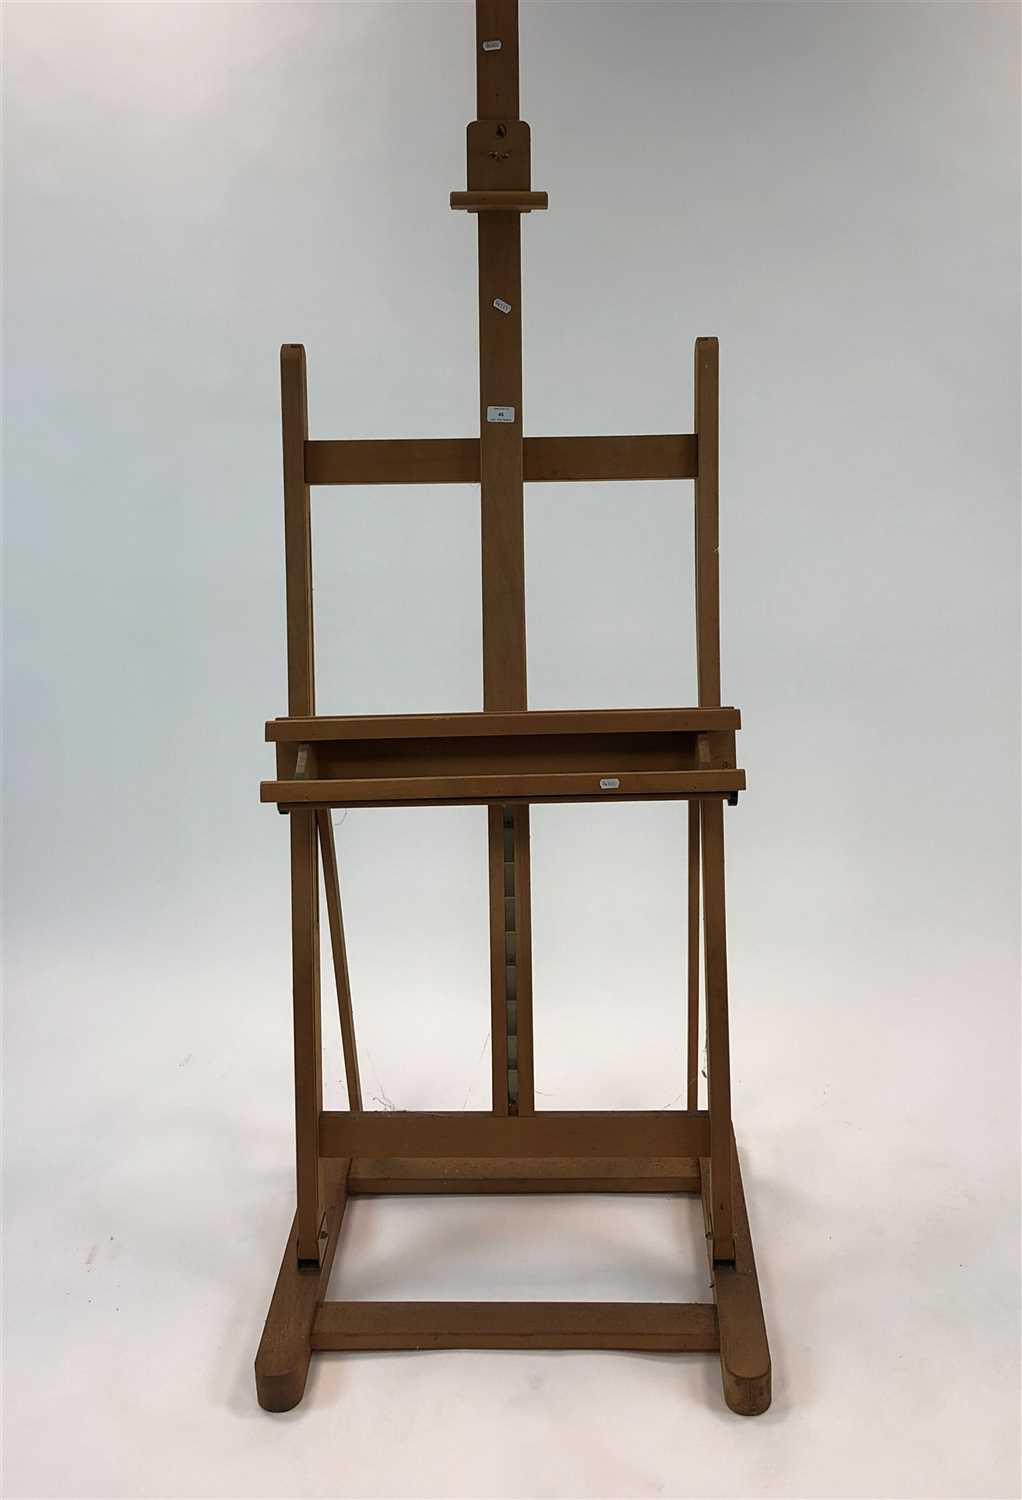 Lot 45 - Wooden adjustable picture easel